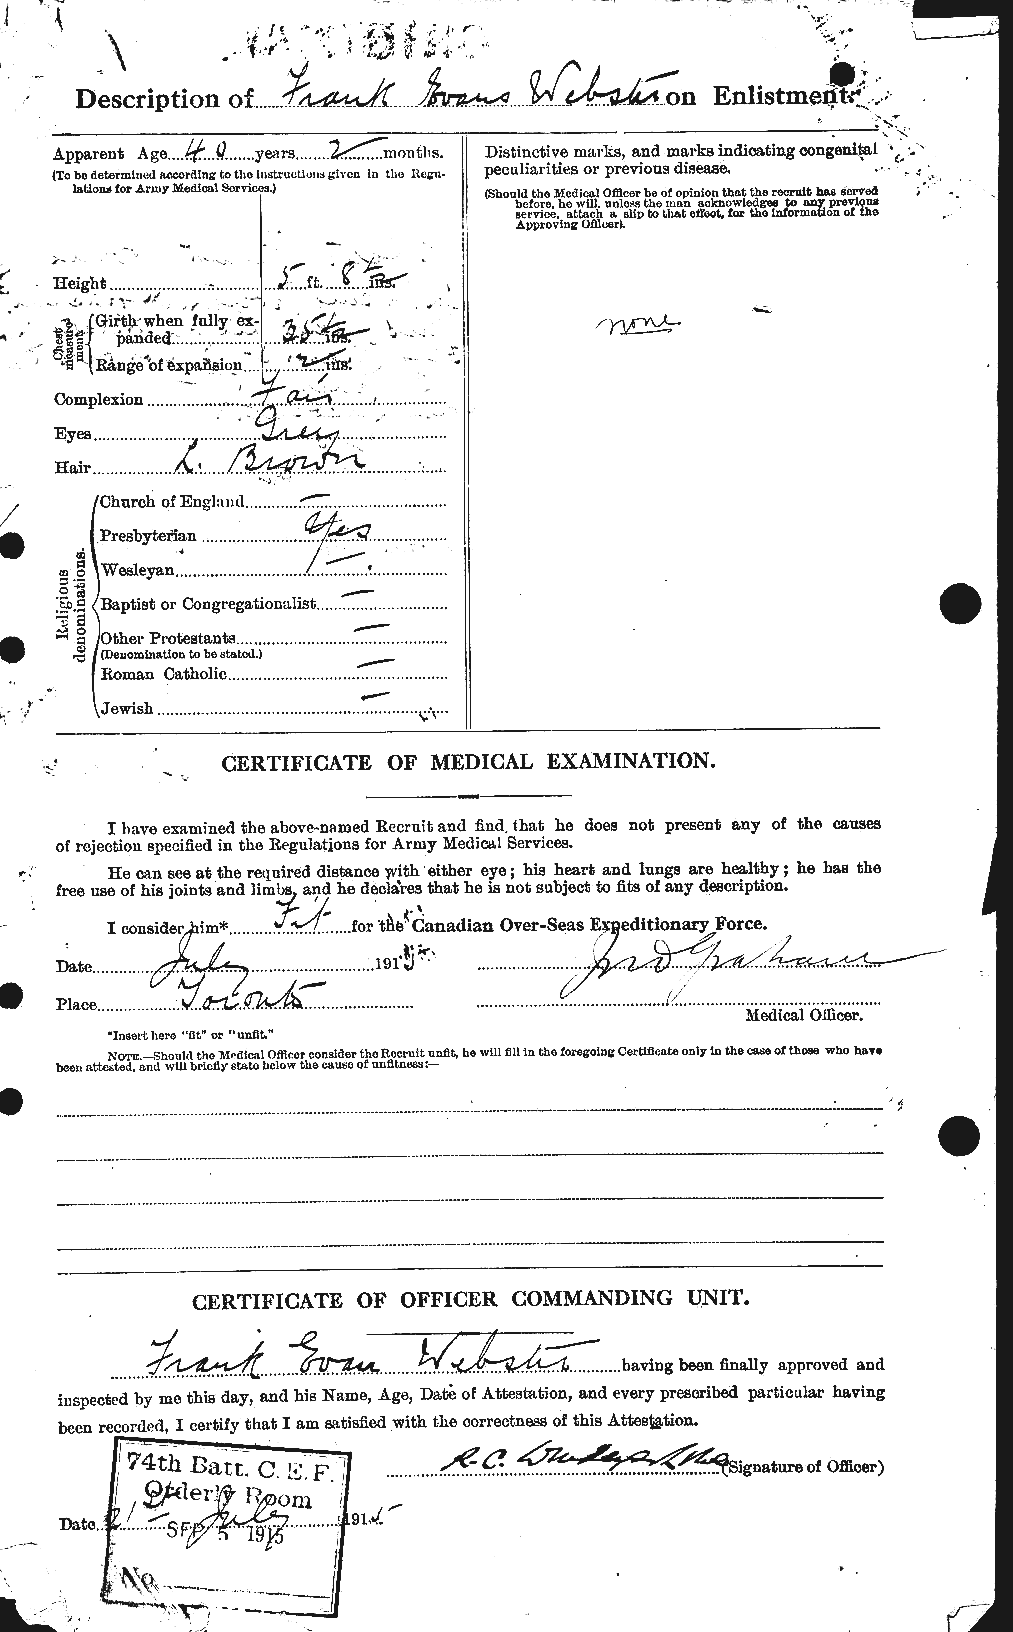 Personnel Records of the First World War - CEF 670351b